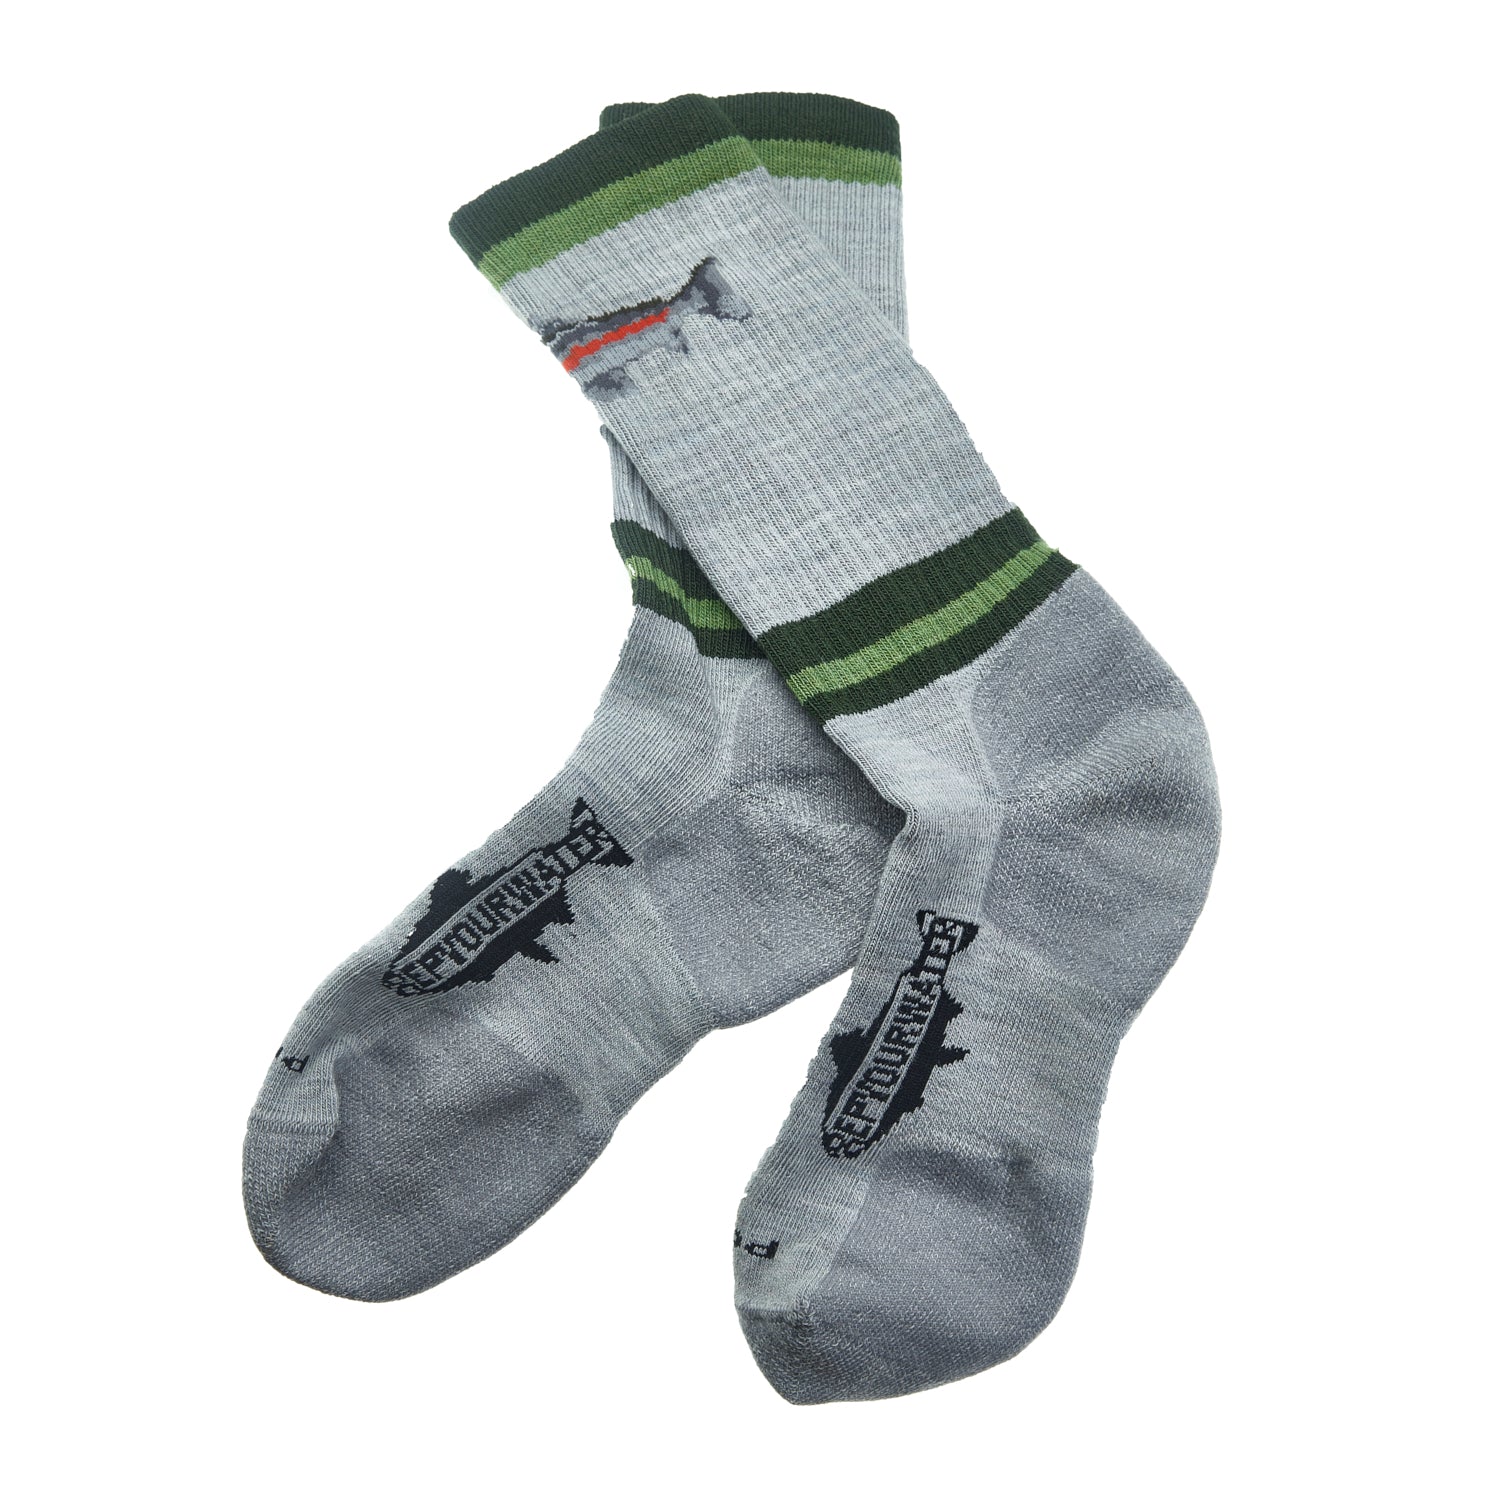 A pair of light gray socks with green stripes and a rainbow trout on them..